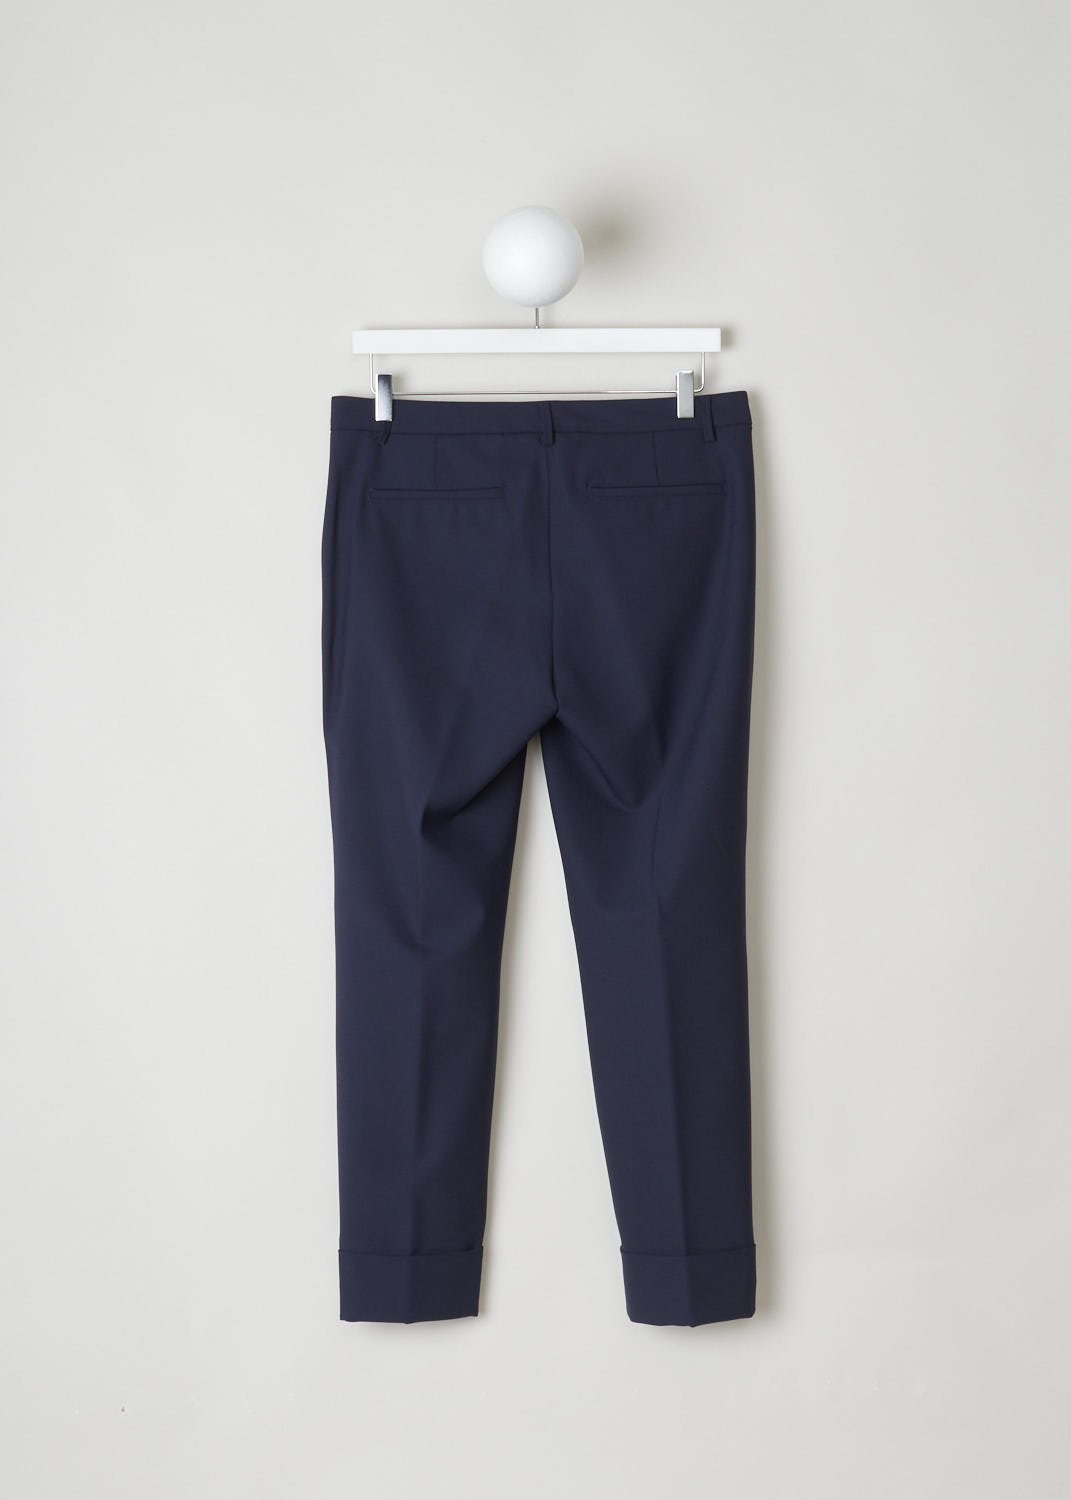 CLOSED, NAVY BLUE TROUSERS, STEWART_C91796_5H3_22_568, Blue, Back, Made in the classic trouser model, featuring forward slanted pockets on the front and two welt pockets in the back. What makes this model stand out above the rest is the broad fold-over hem.
